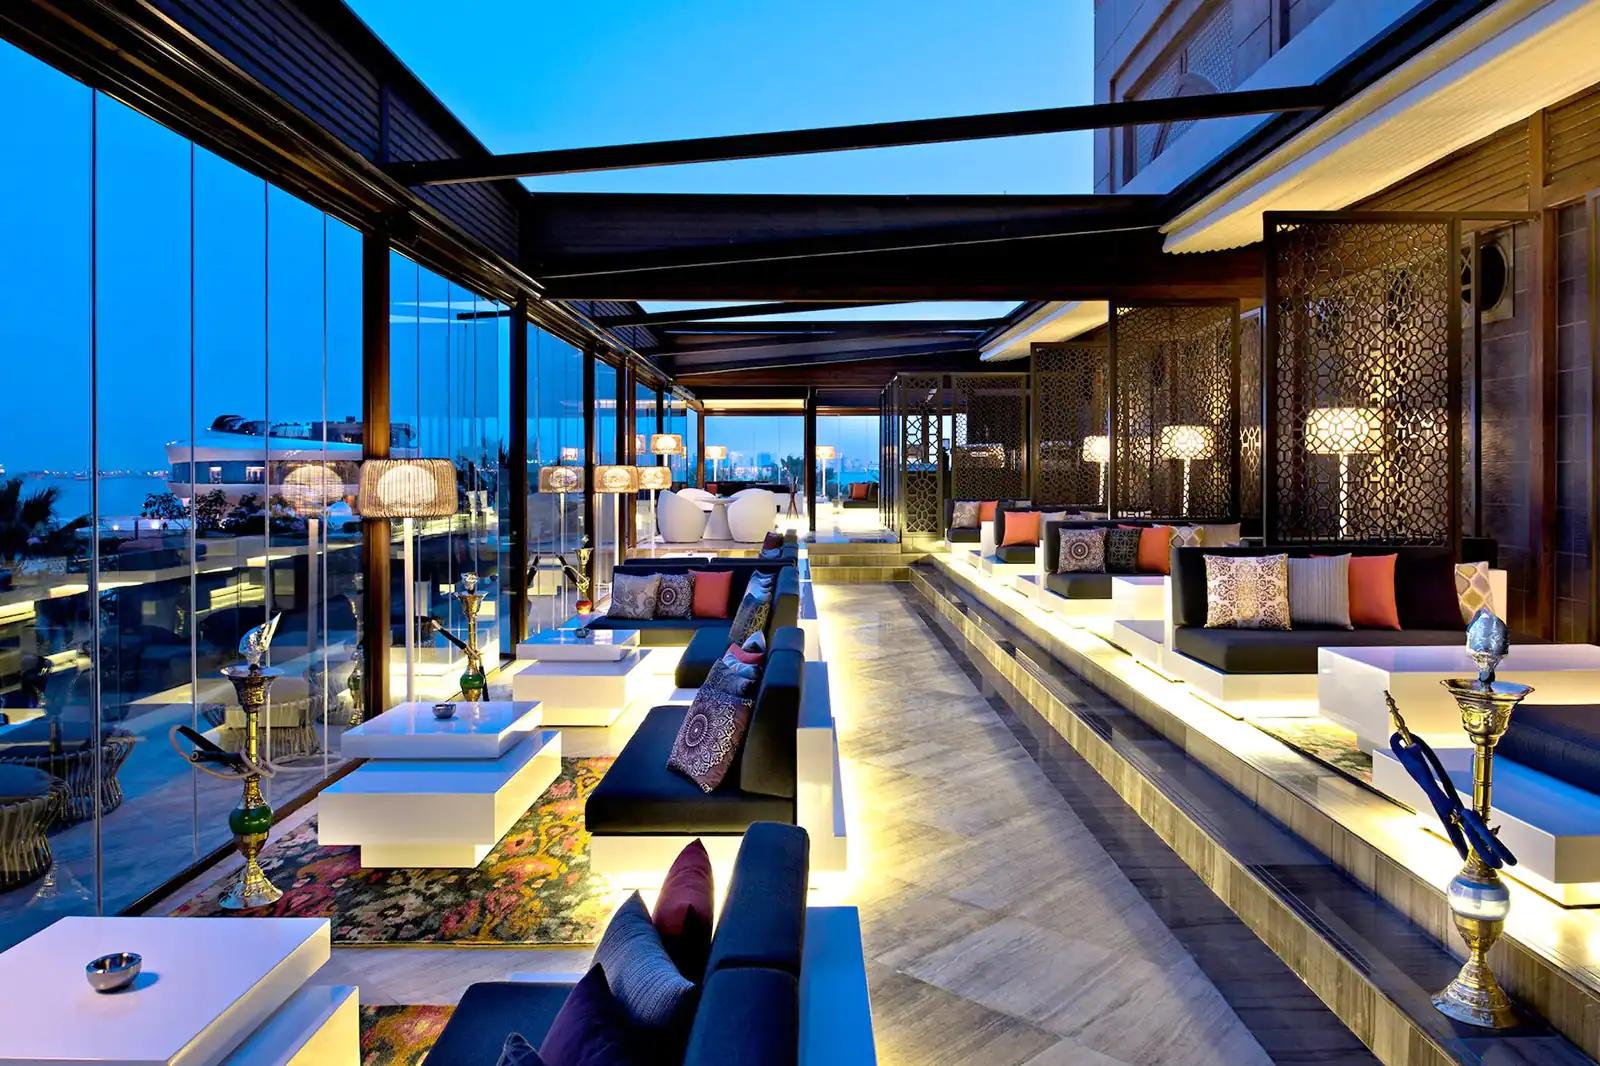 CATCH DRINKS AT THIS ROOFTOP HOTSPOT - SHISHA TERRACE AT FOUR SEASONS HOTEL DOHA